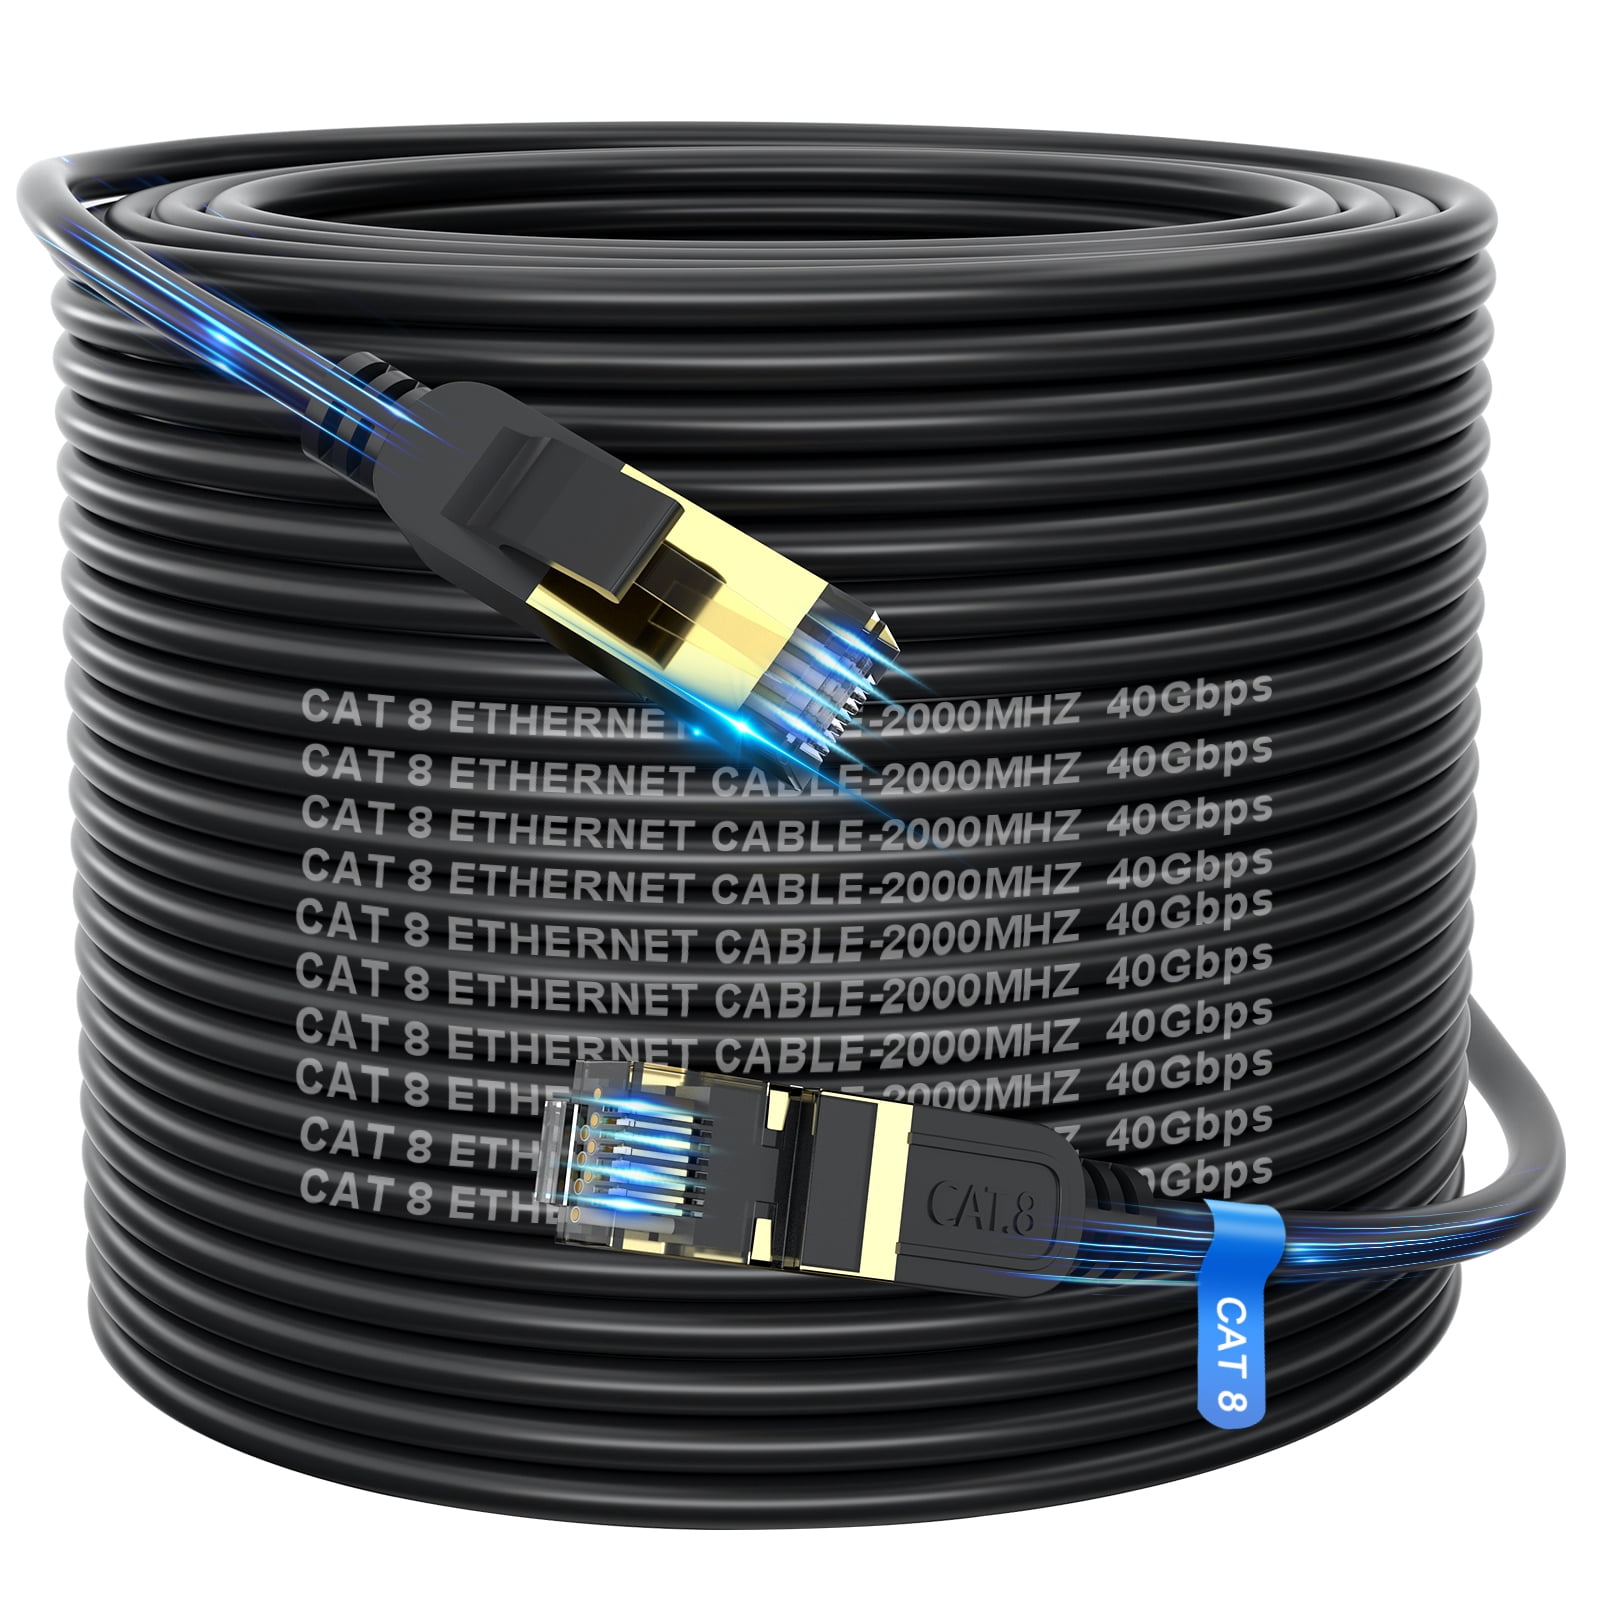 Cat8 Ethernet Cable 200ft Indoor&Outdoor Heavy Duty Network Cable High  Speed 40Gbps 26AWG 2000Mhz with Gold Plated Plug RJ45 Connector  Weatherproof S/FTP UV Resistant for Router Gaming Modem Xbox PS4 